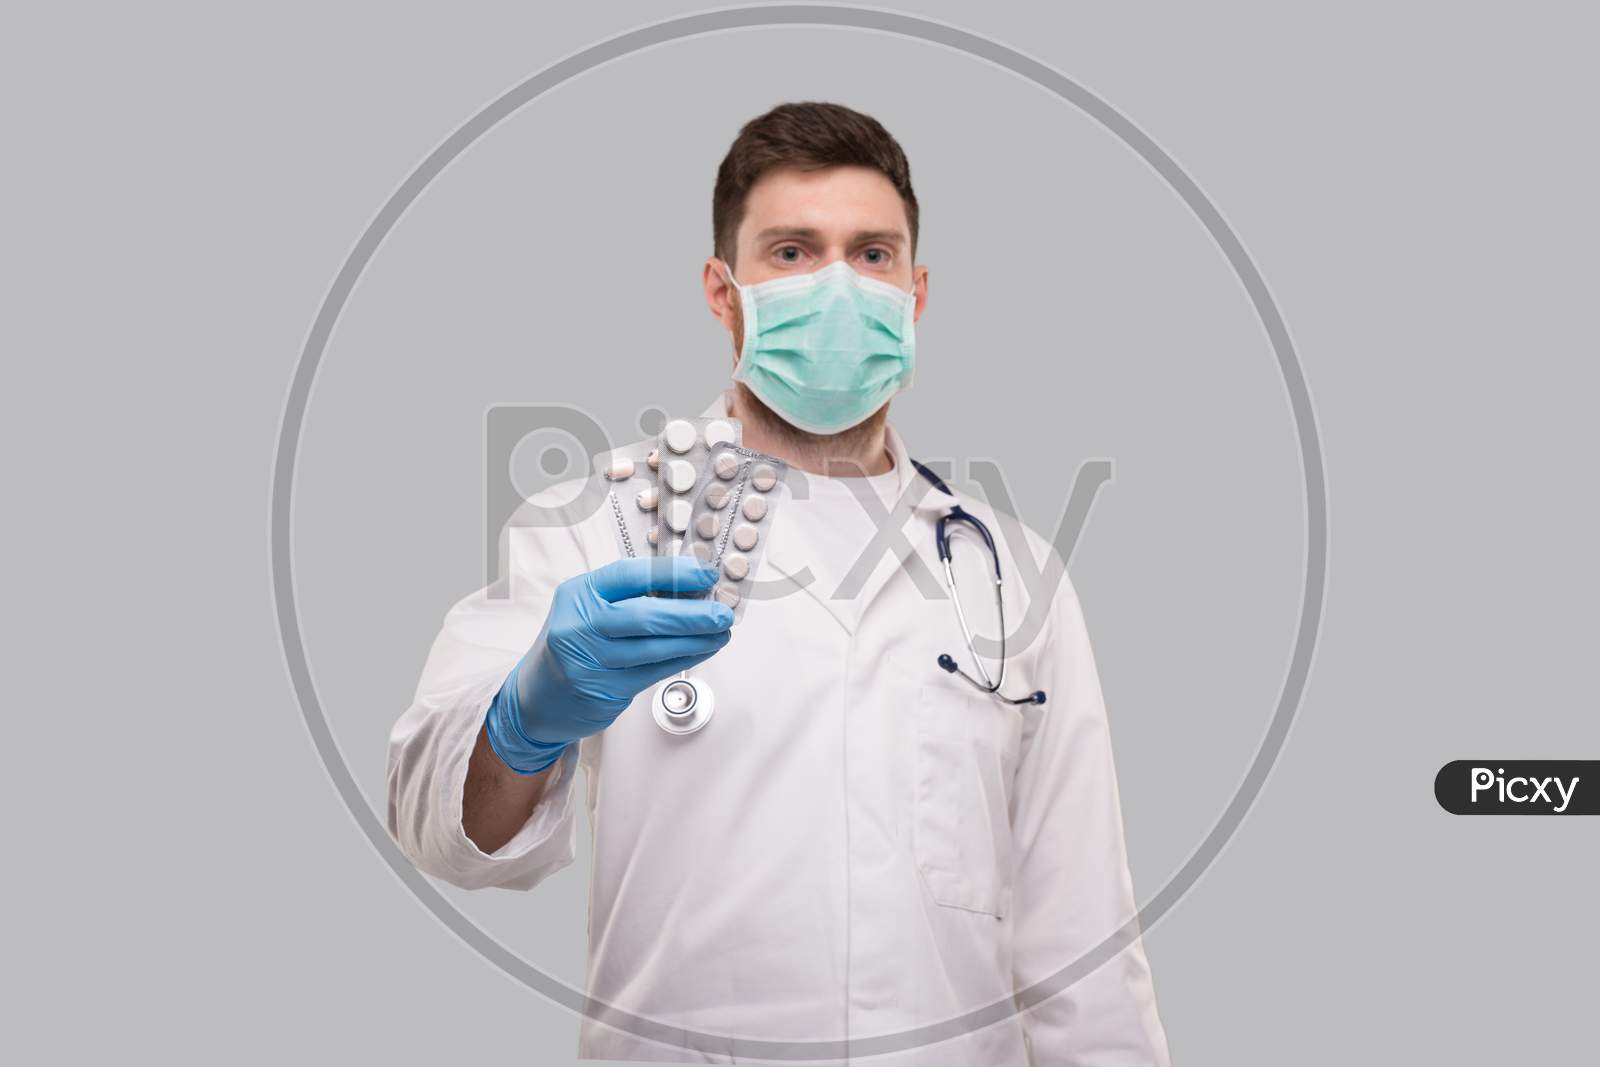 Man Doctor Showing Pills Wearing Medical Mask. Doctor Holding Tablets. Corona Virus Concept.